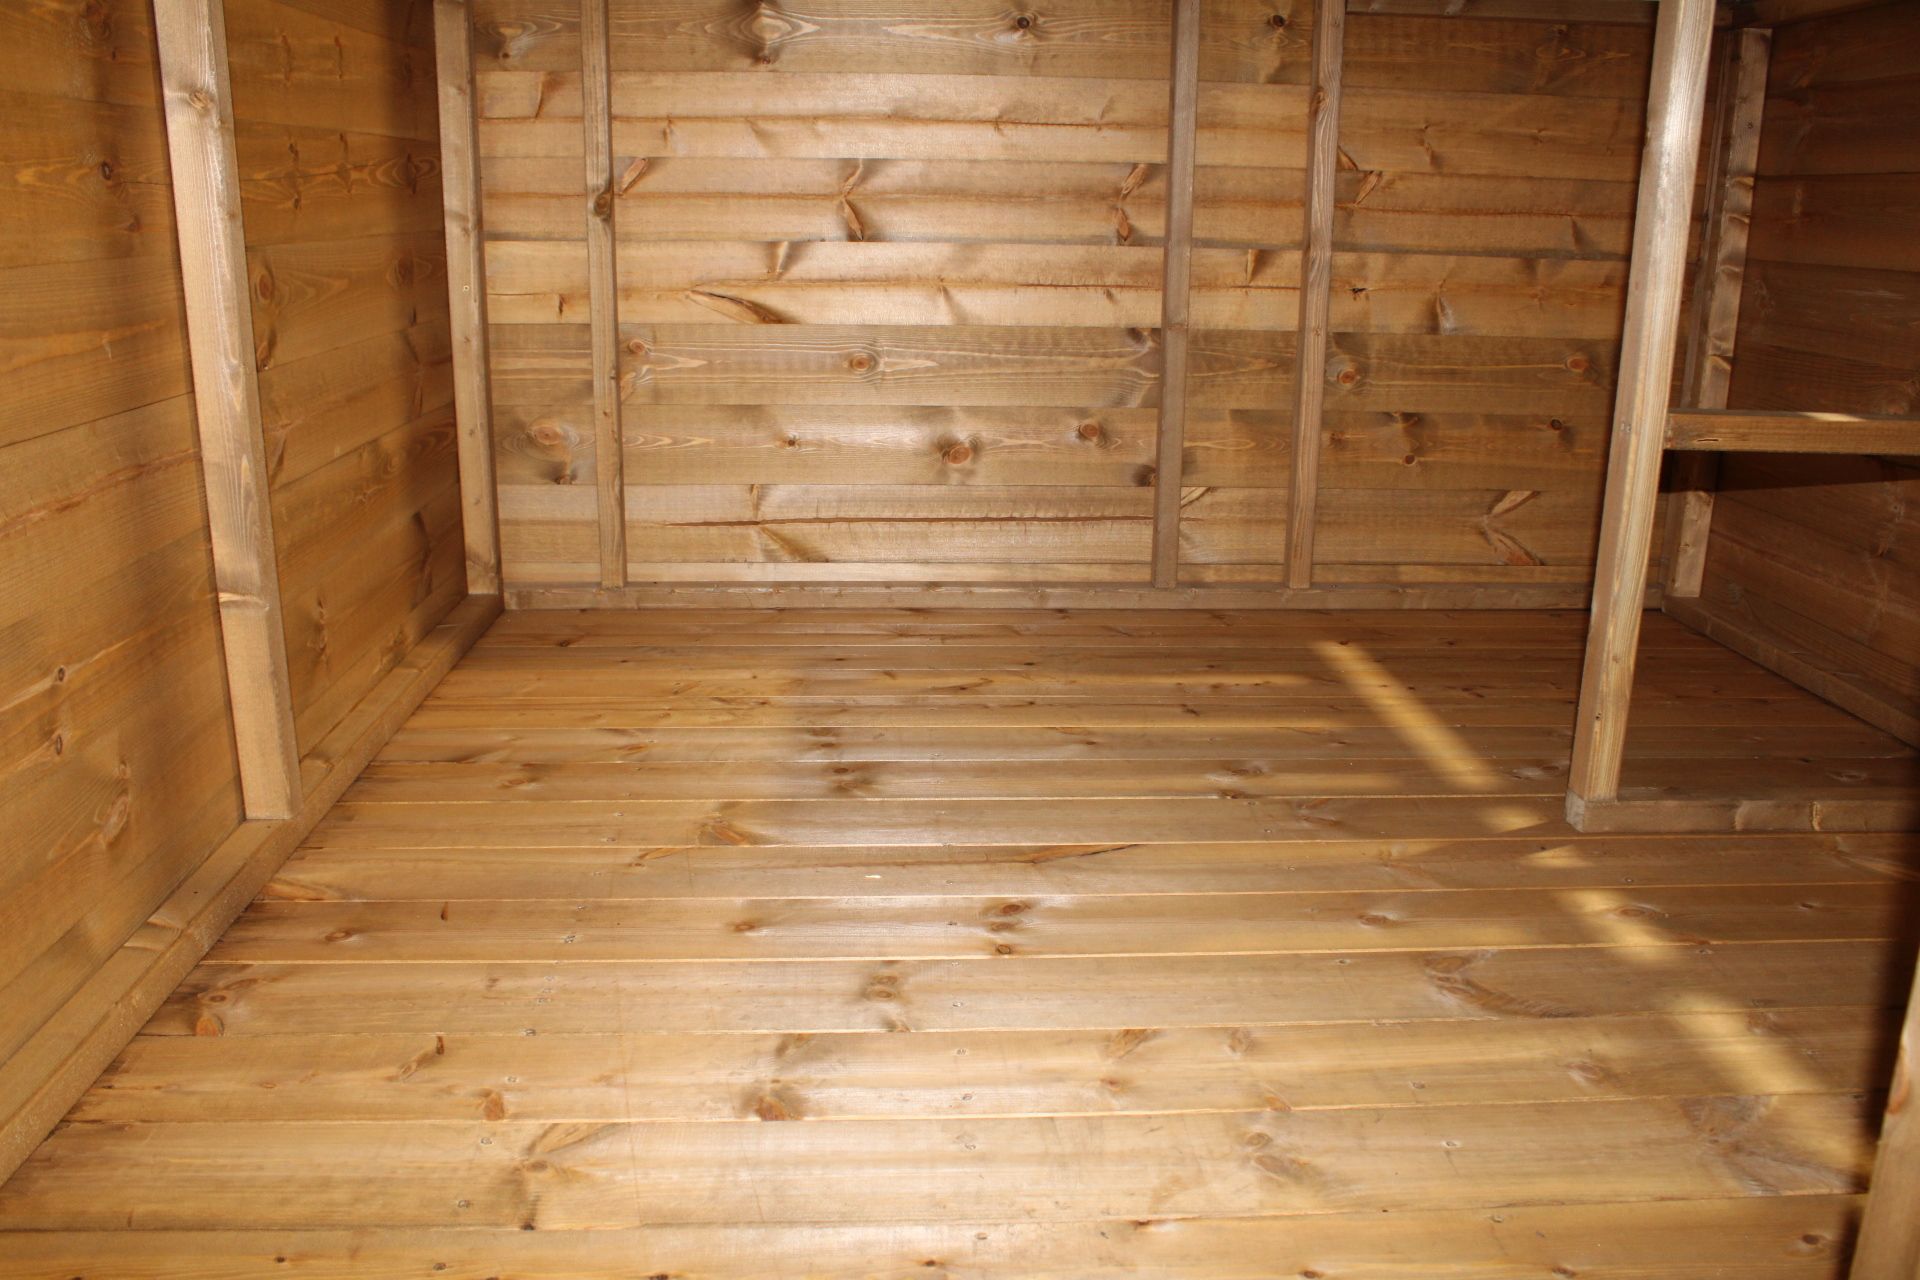 6x6 BRAND NEW Potting shed, Standard 16mm Nominal Cladding - Image 3 of 8